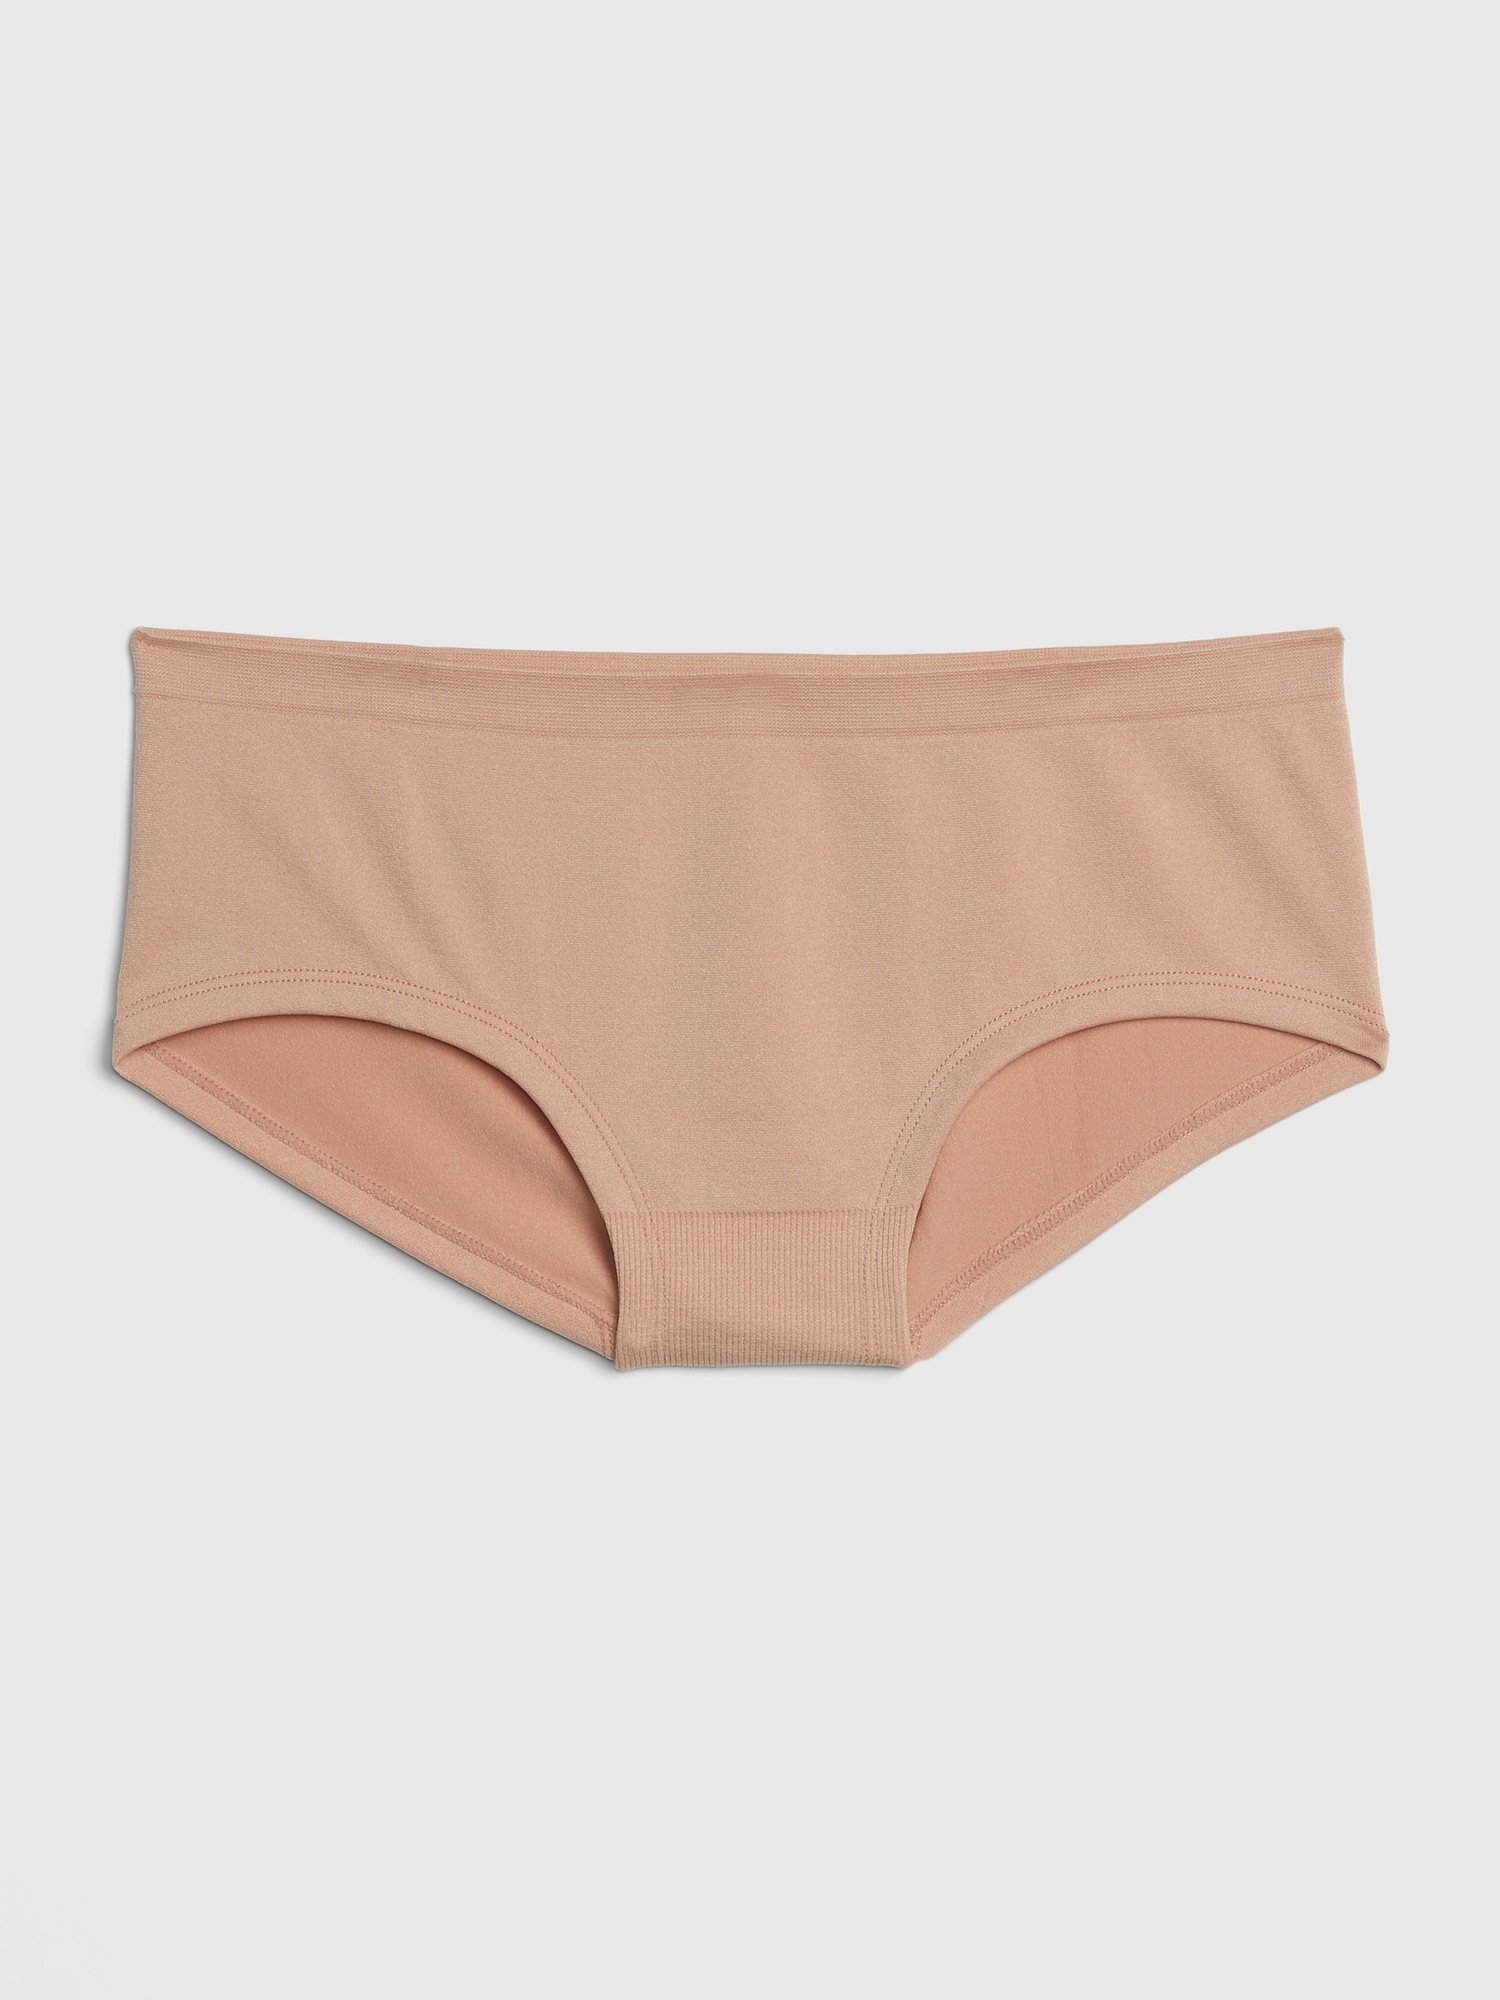 Gap on X: Introducing Love by GapBody — luxurious comfort and